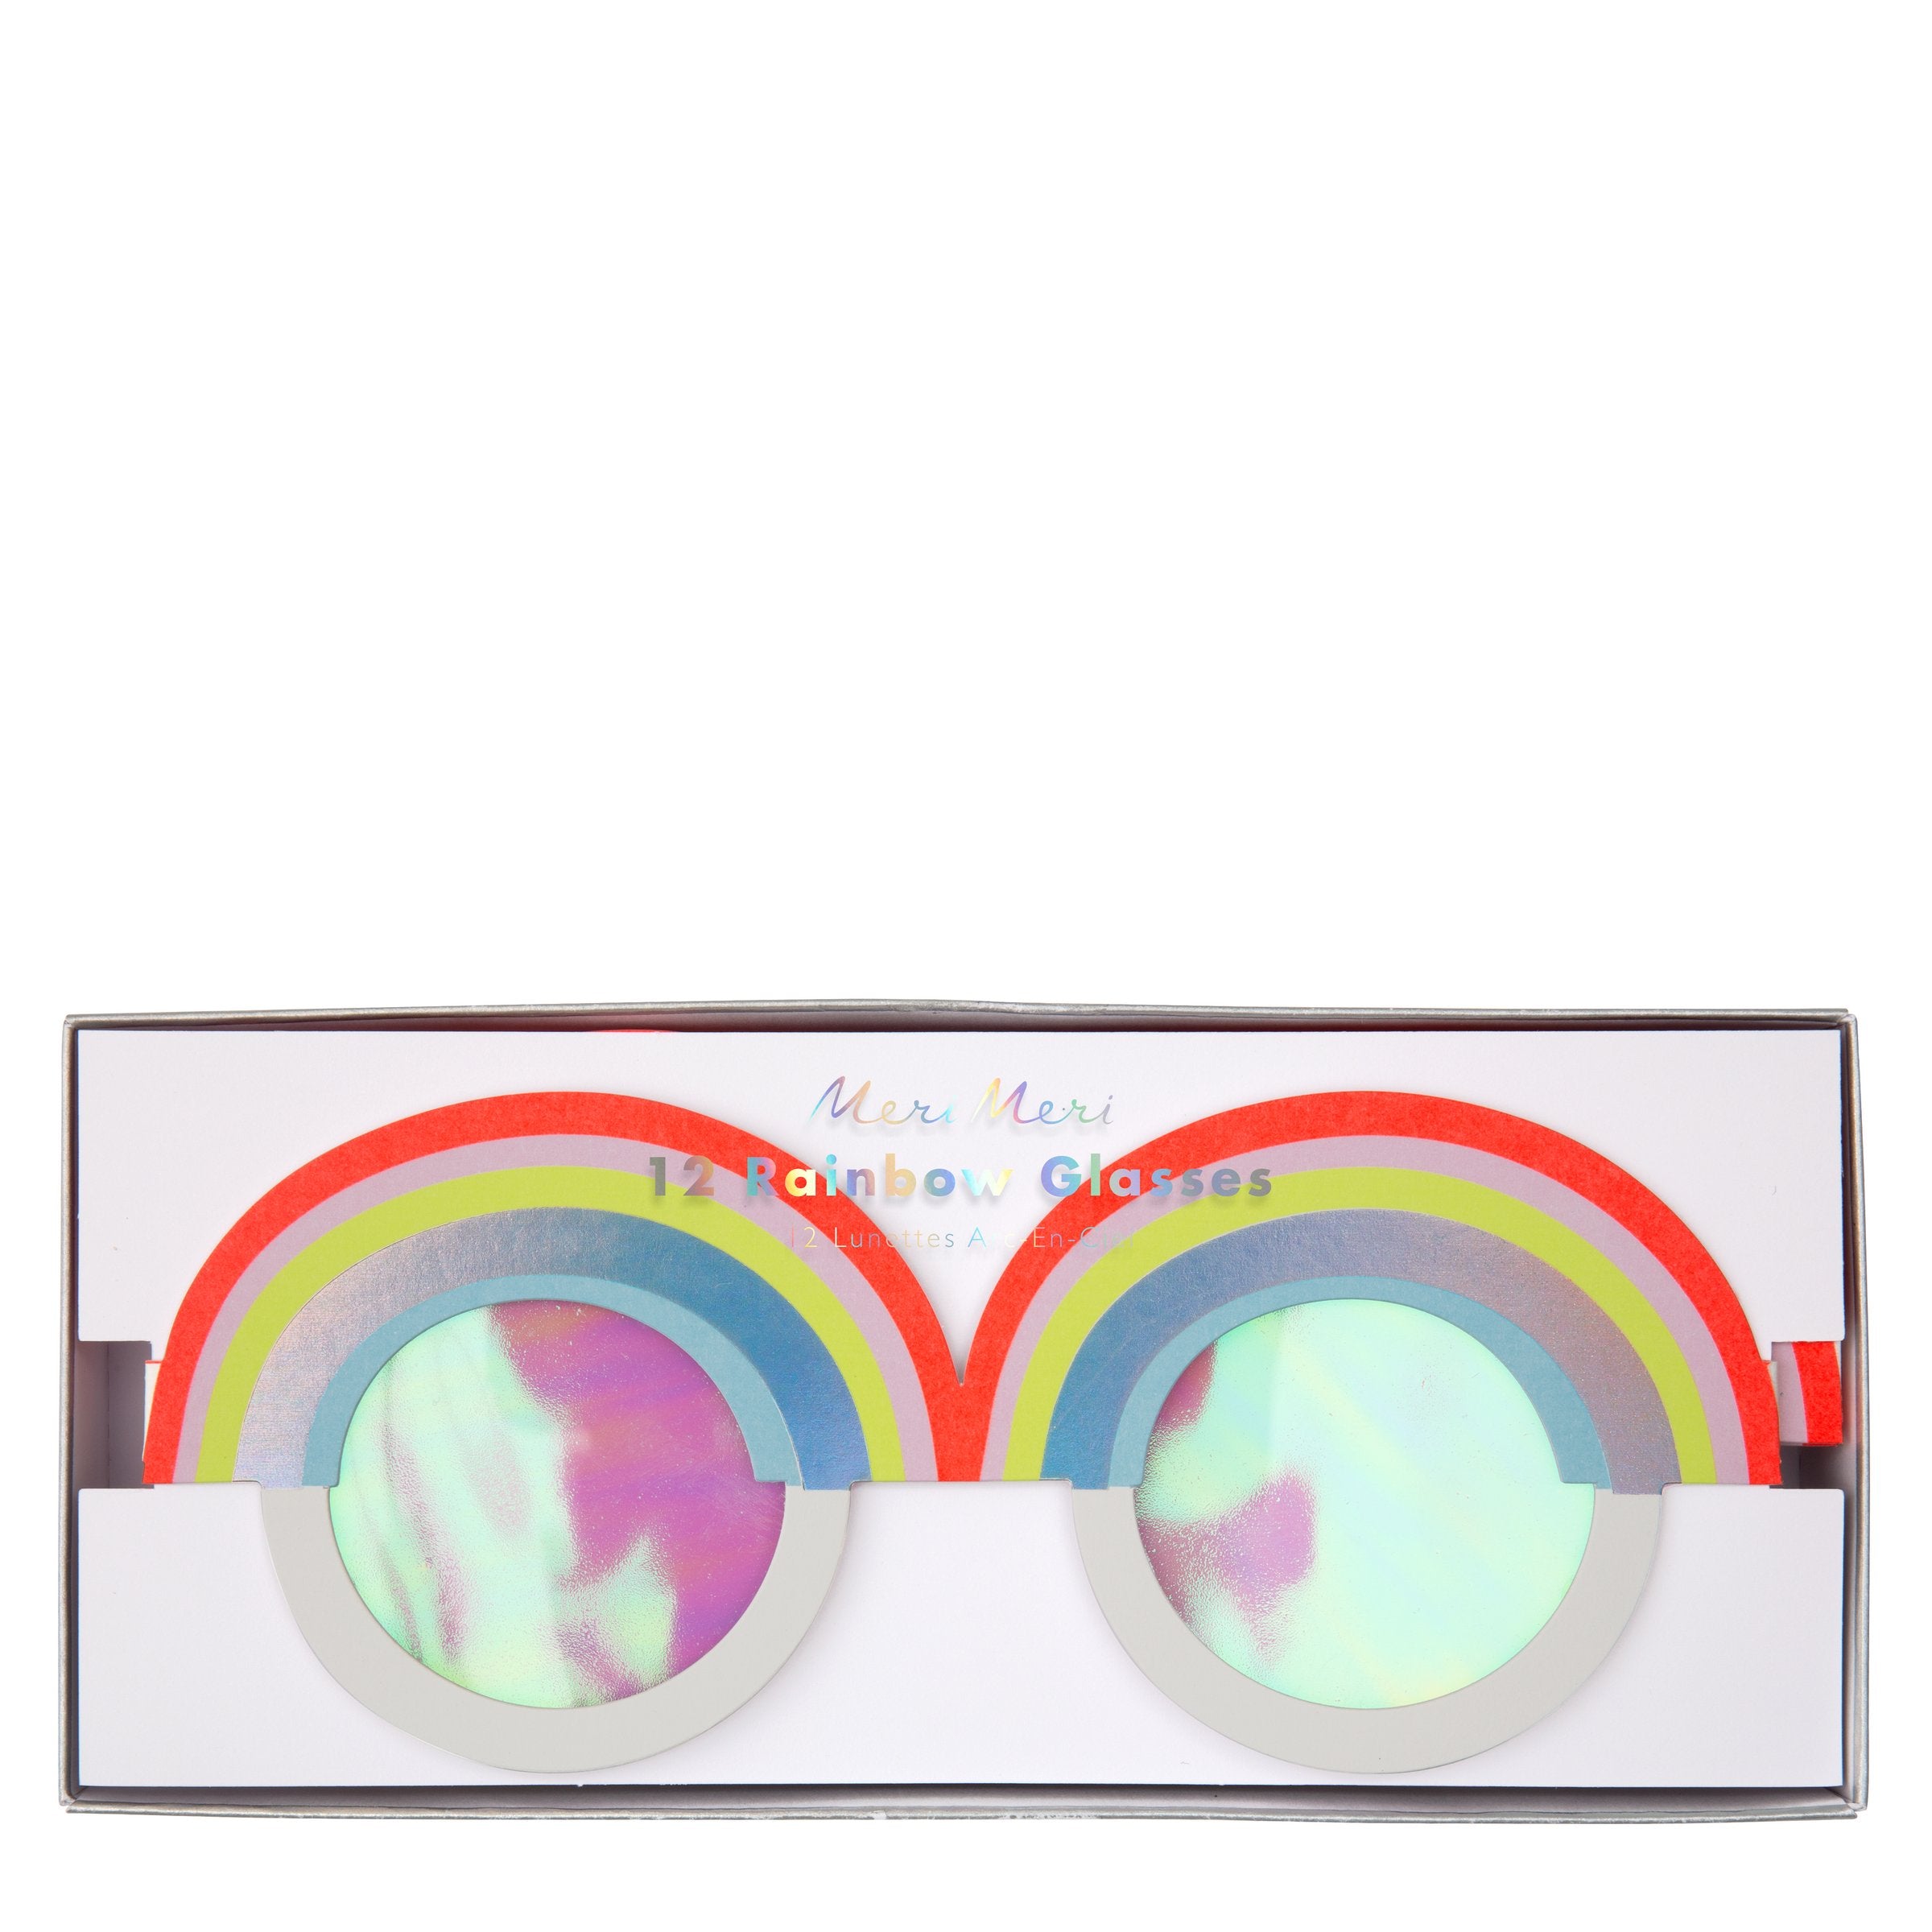 These fun rainbow glasses have iridescent lenses, and neon and holographic print detail.